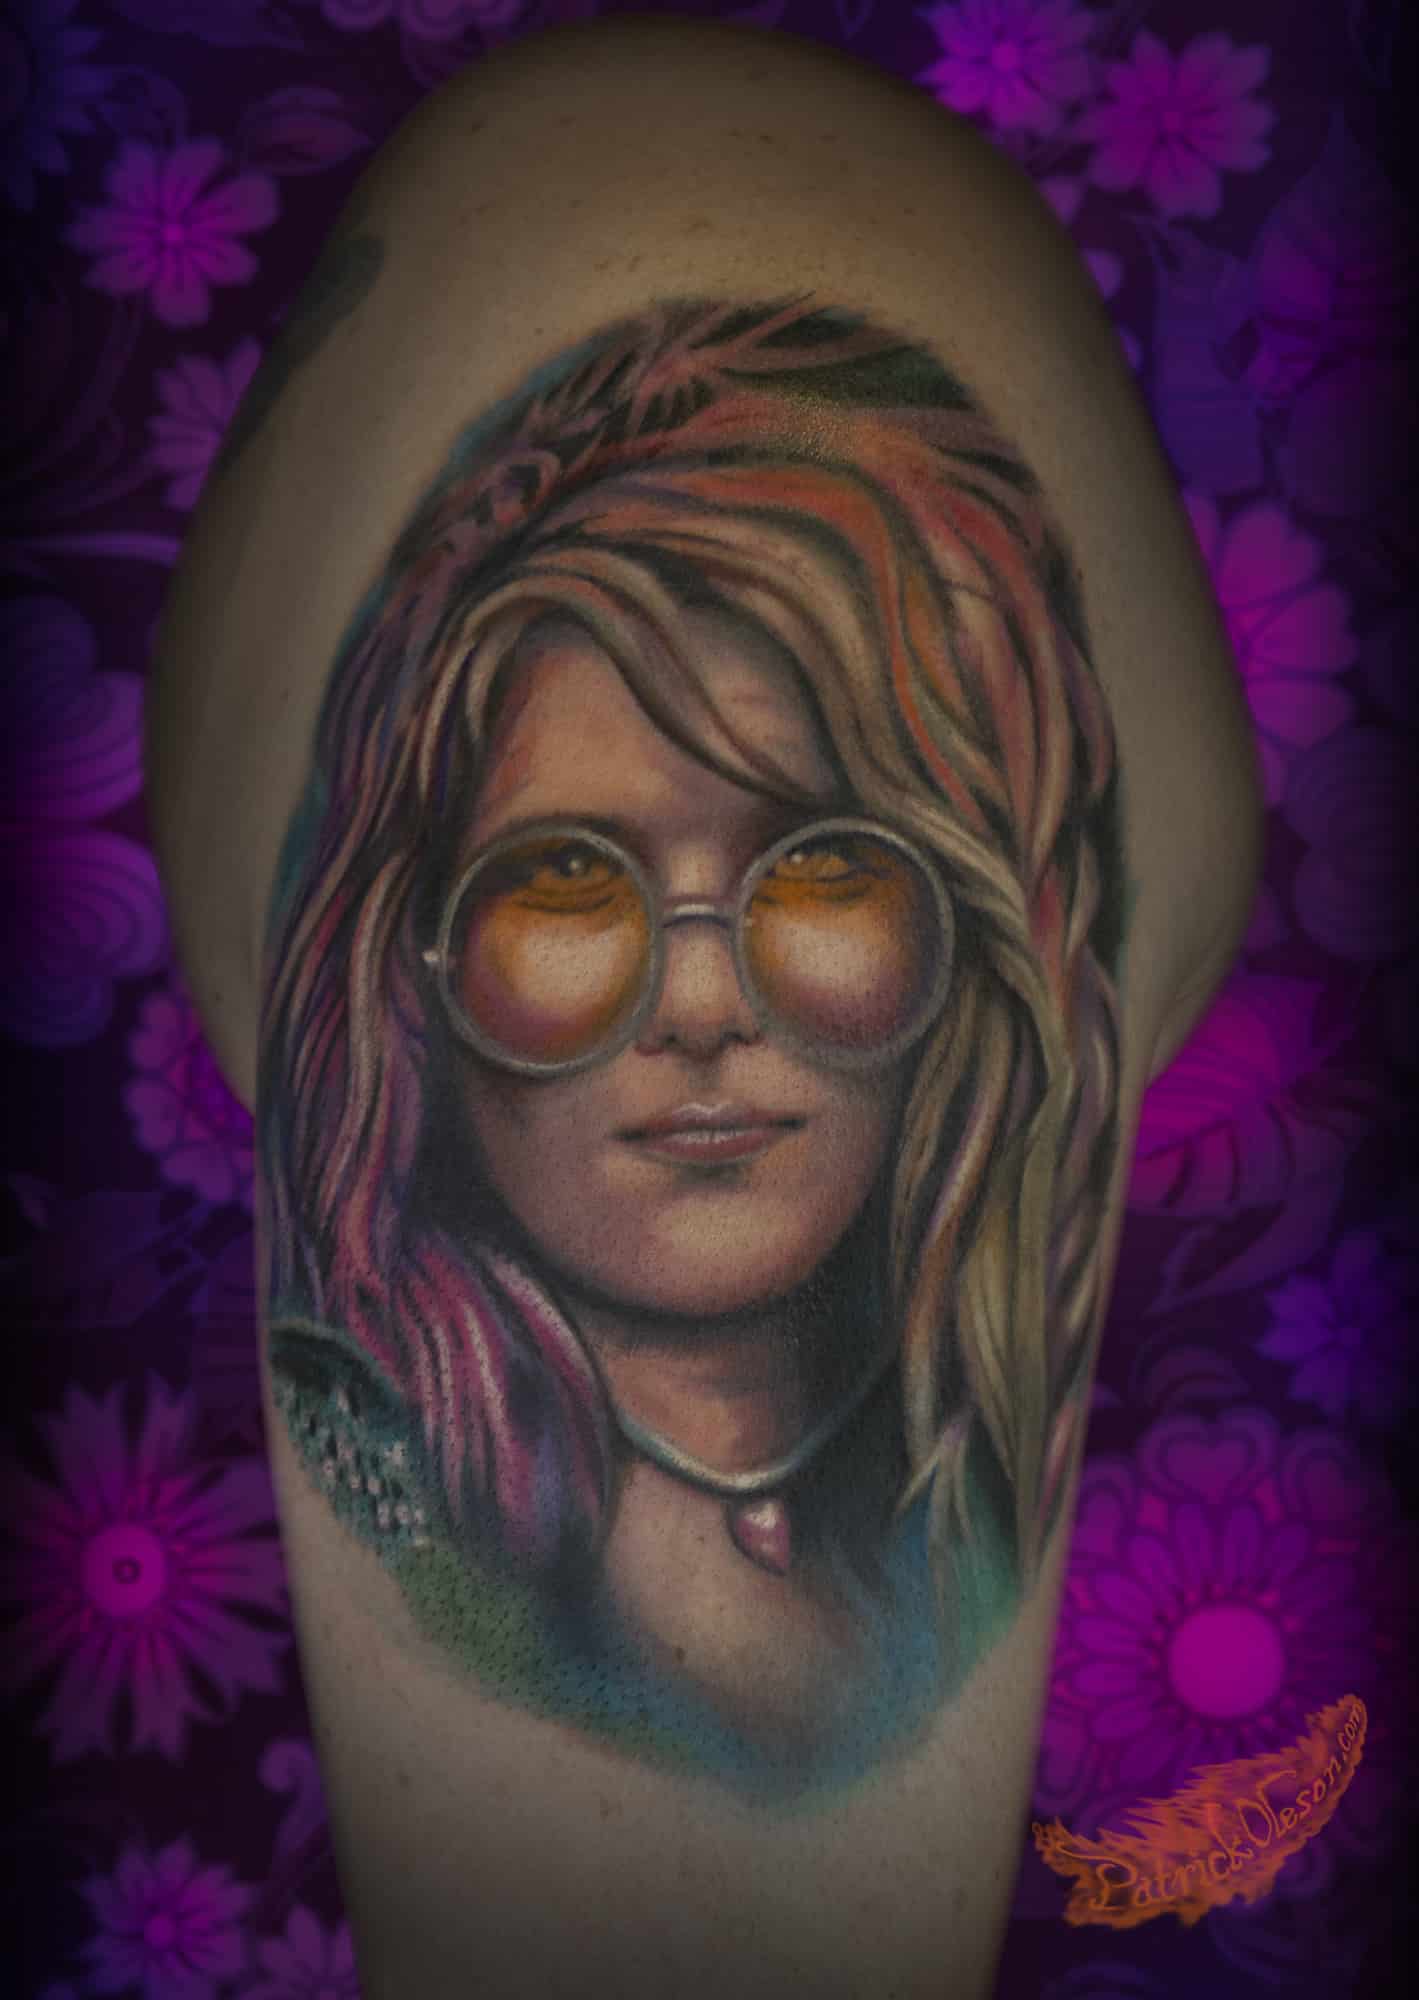 Remembering Janis Joplin, and the Tattoo Lyle Tuttle Inked On Her